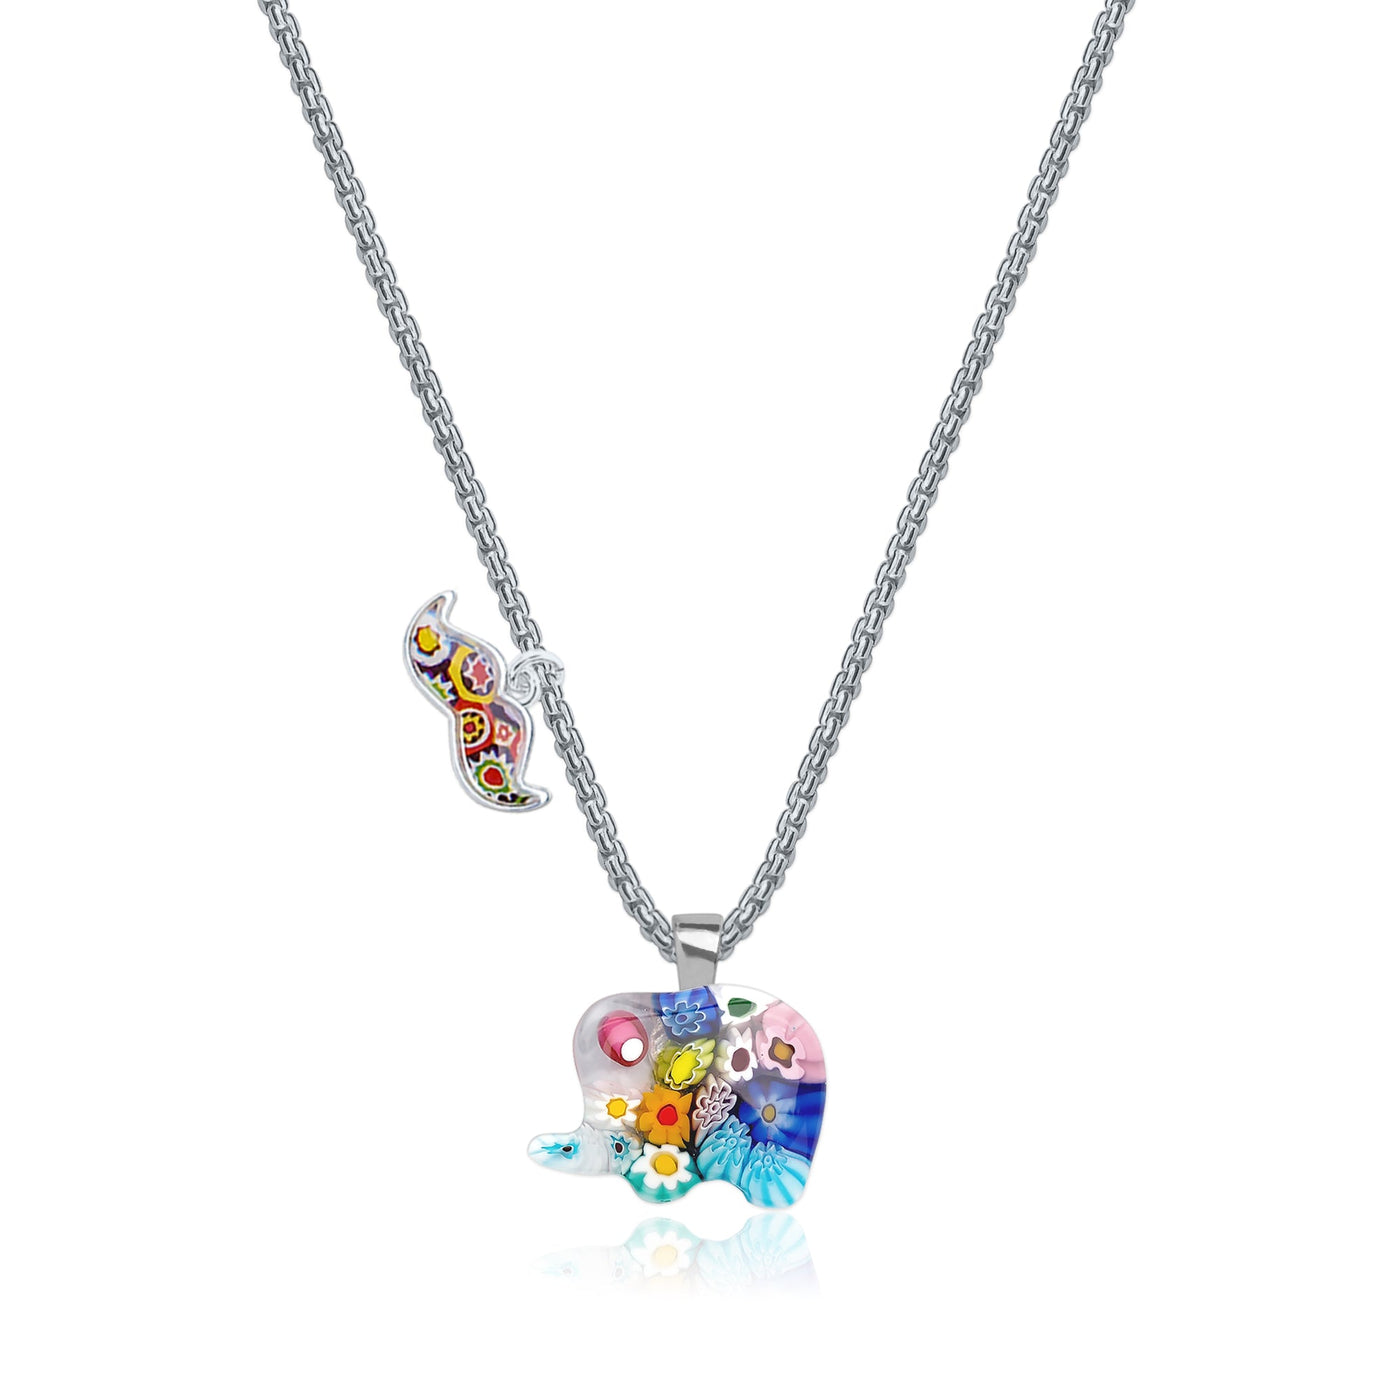 Elephant in Bloom Necklace - 1mm 925 Sterling [Free upgrade] - Pendant Necklace